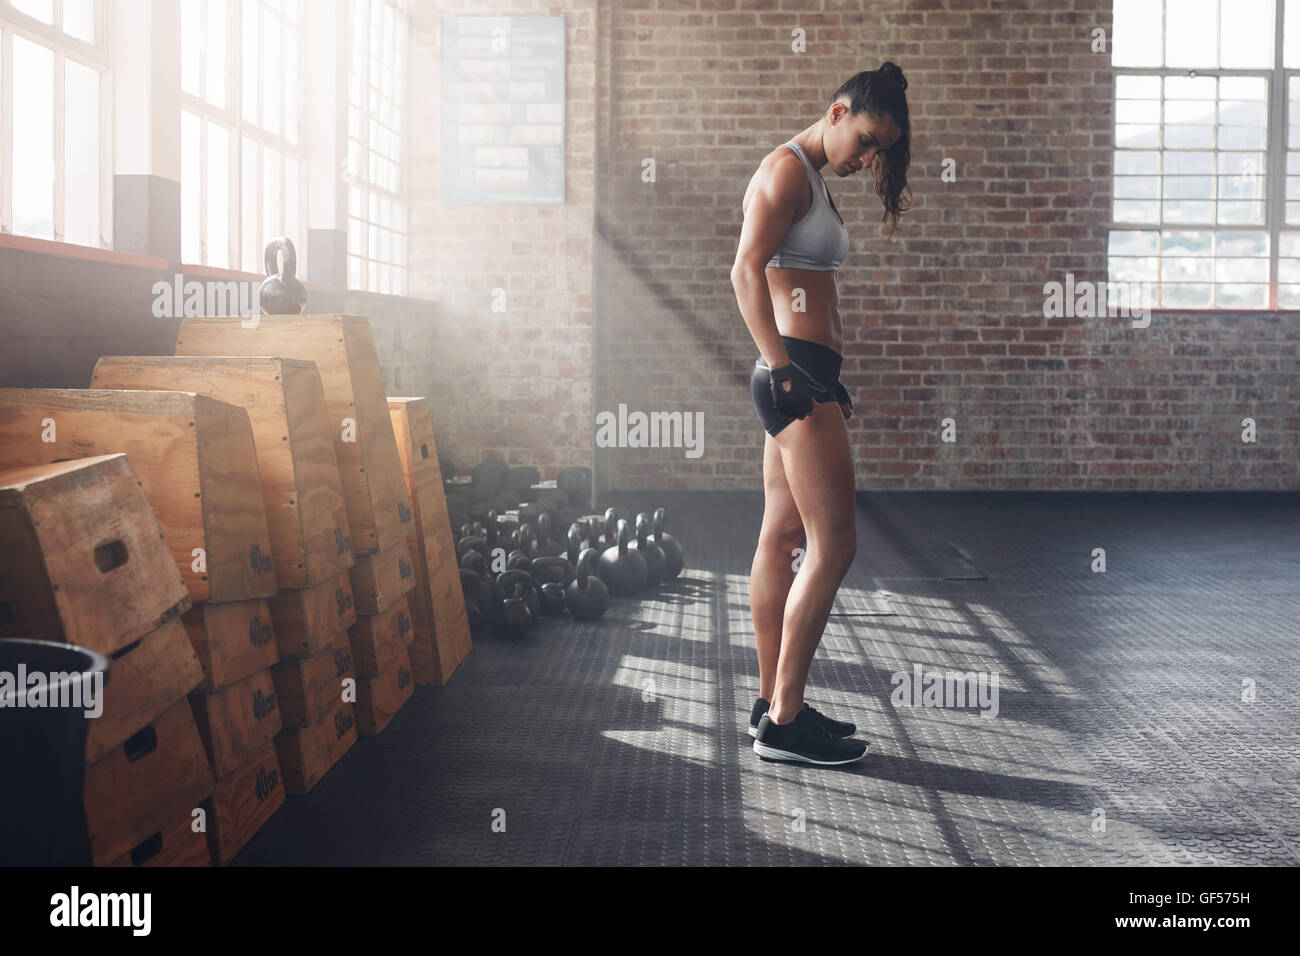 Full length indoor shot of determined young woman standing in gym. Tough female athlete at crossfit gym with exercise equipments Stock Photo